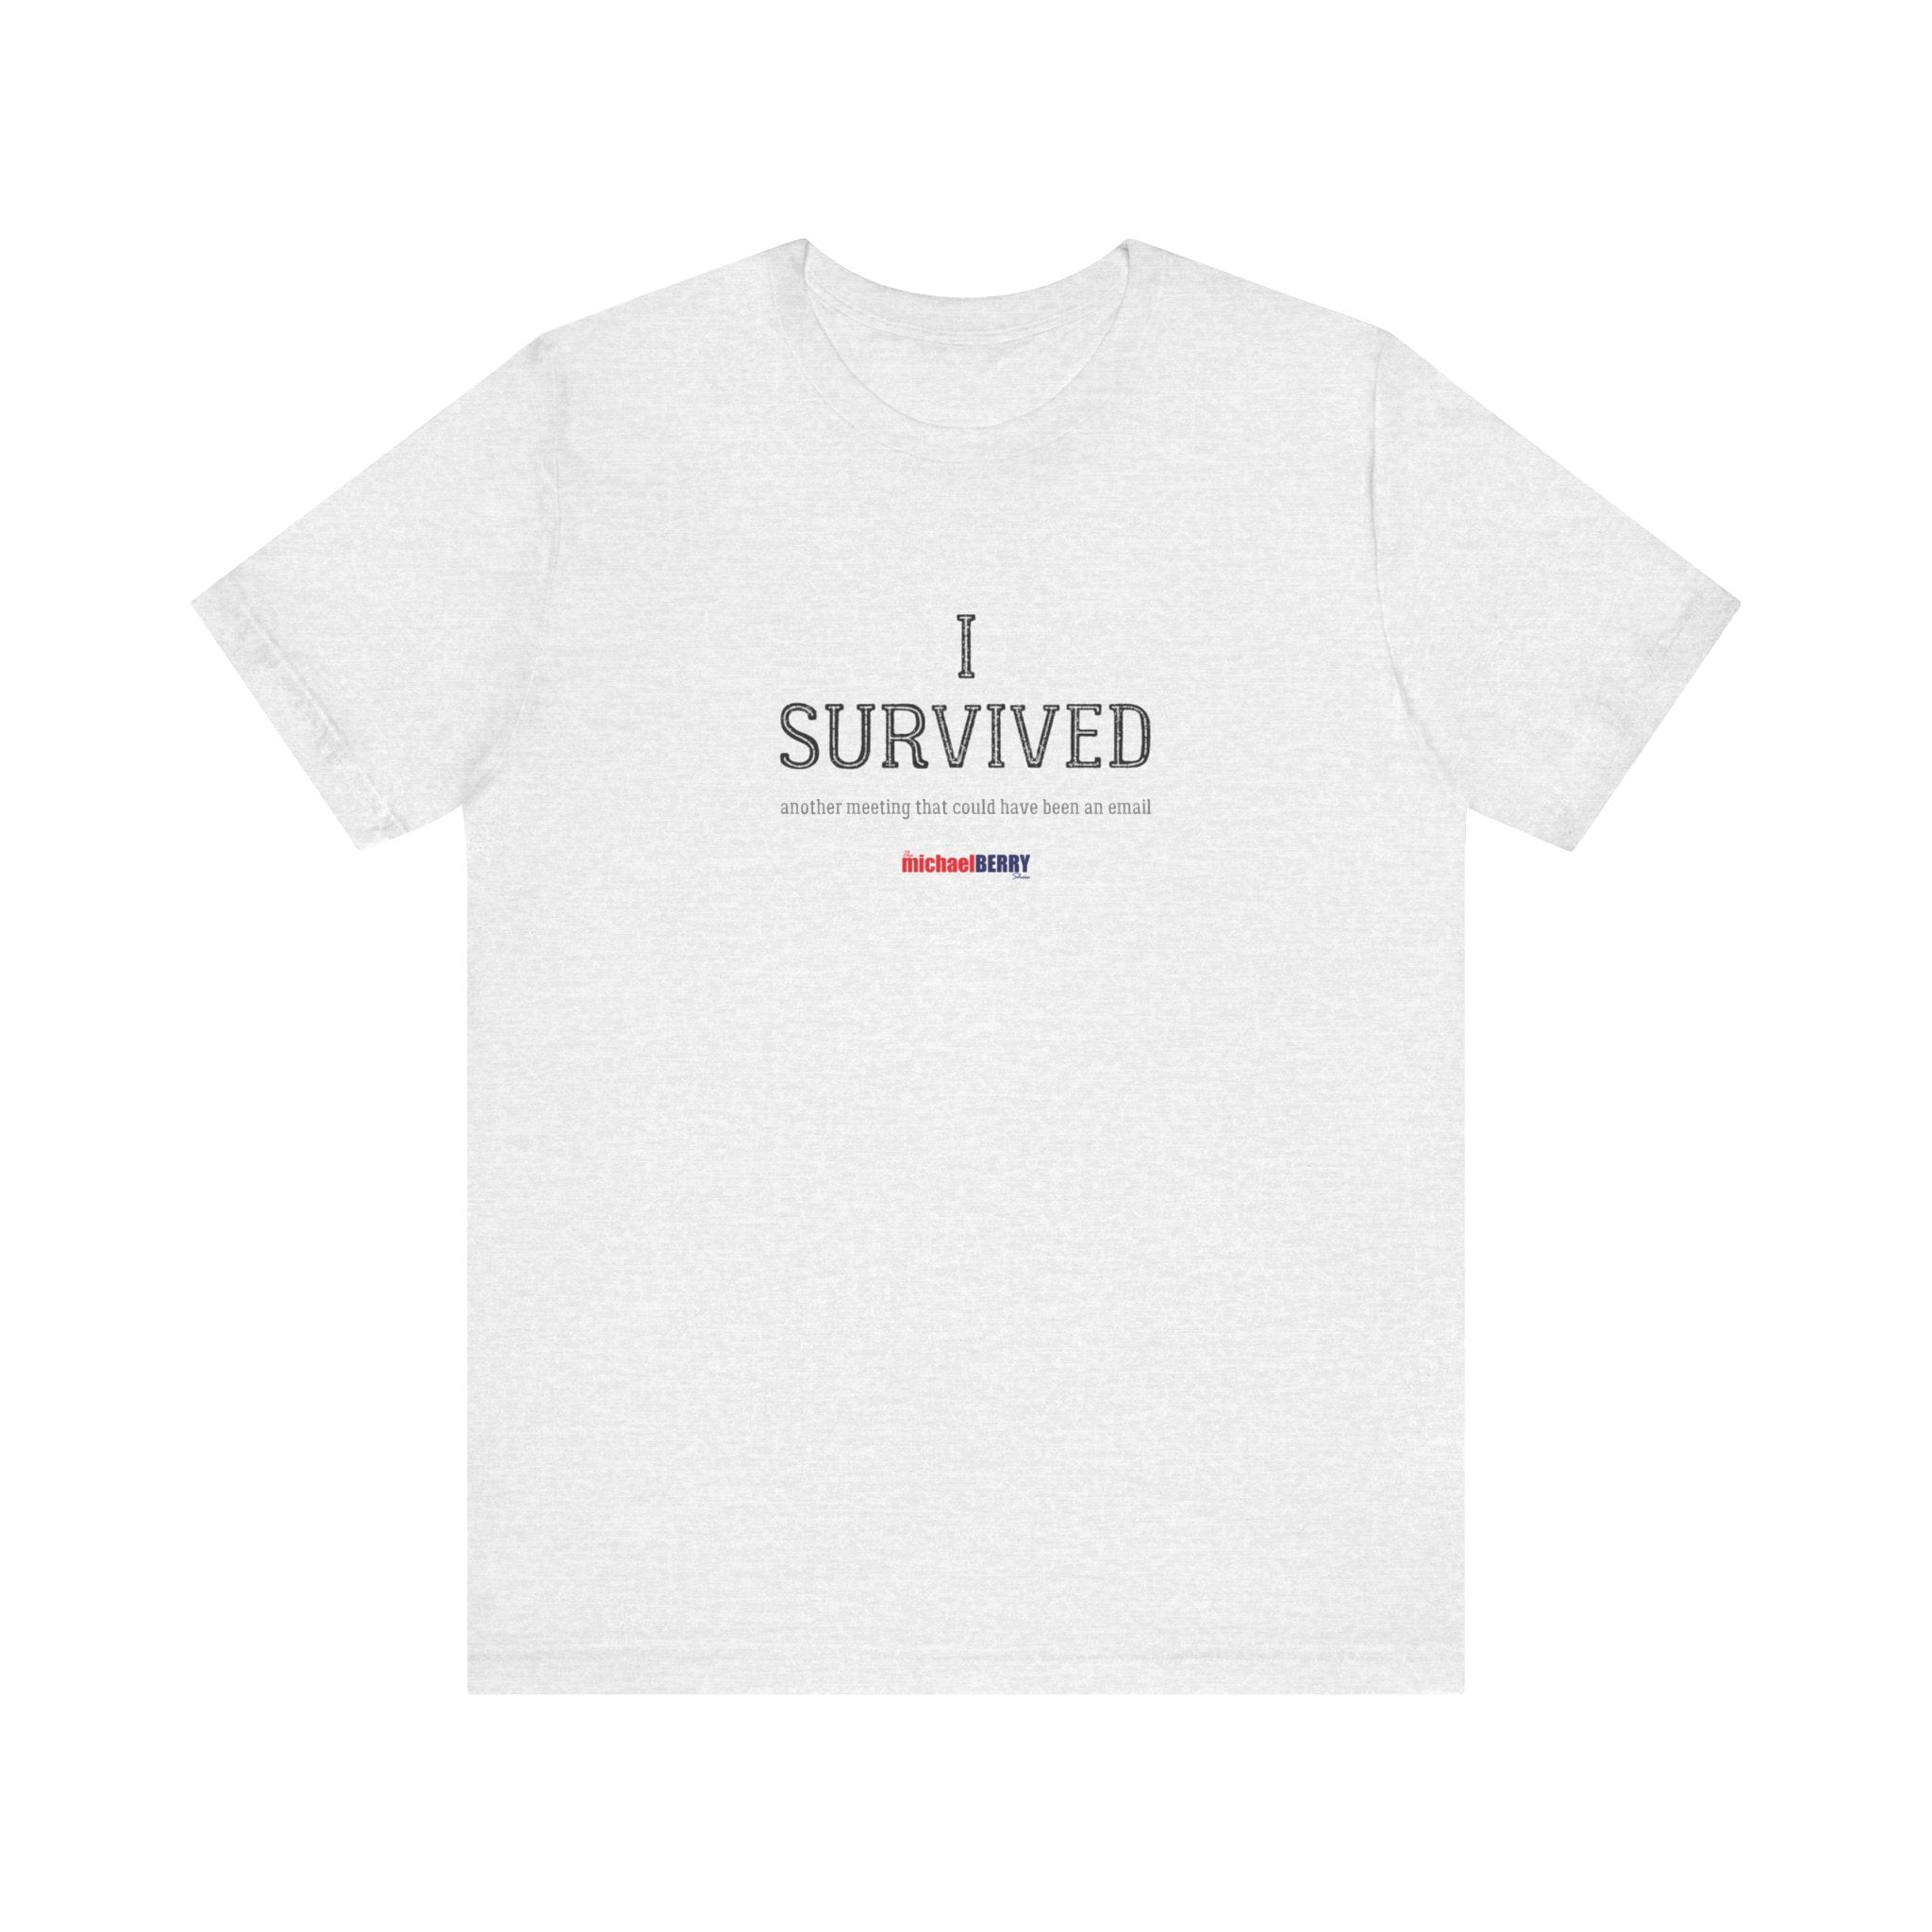 I SURVIVED another meeting that could have been an email - Men's Short Sleeve Tee